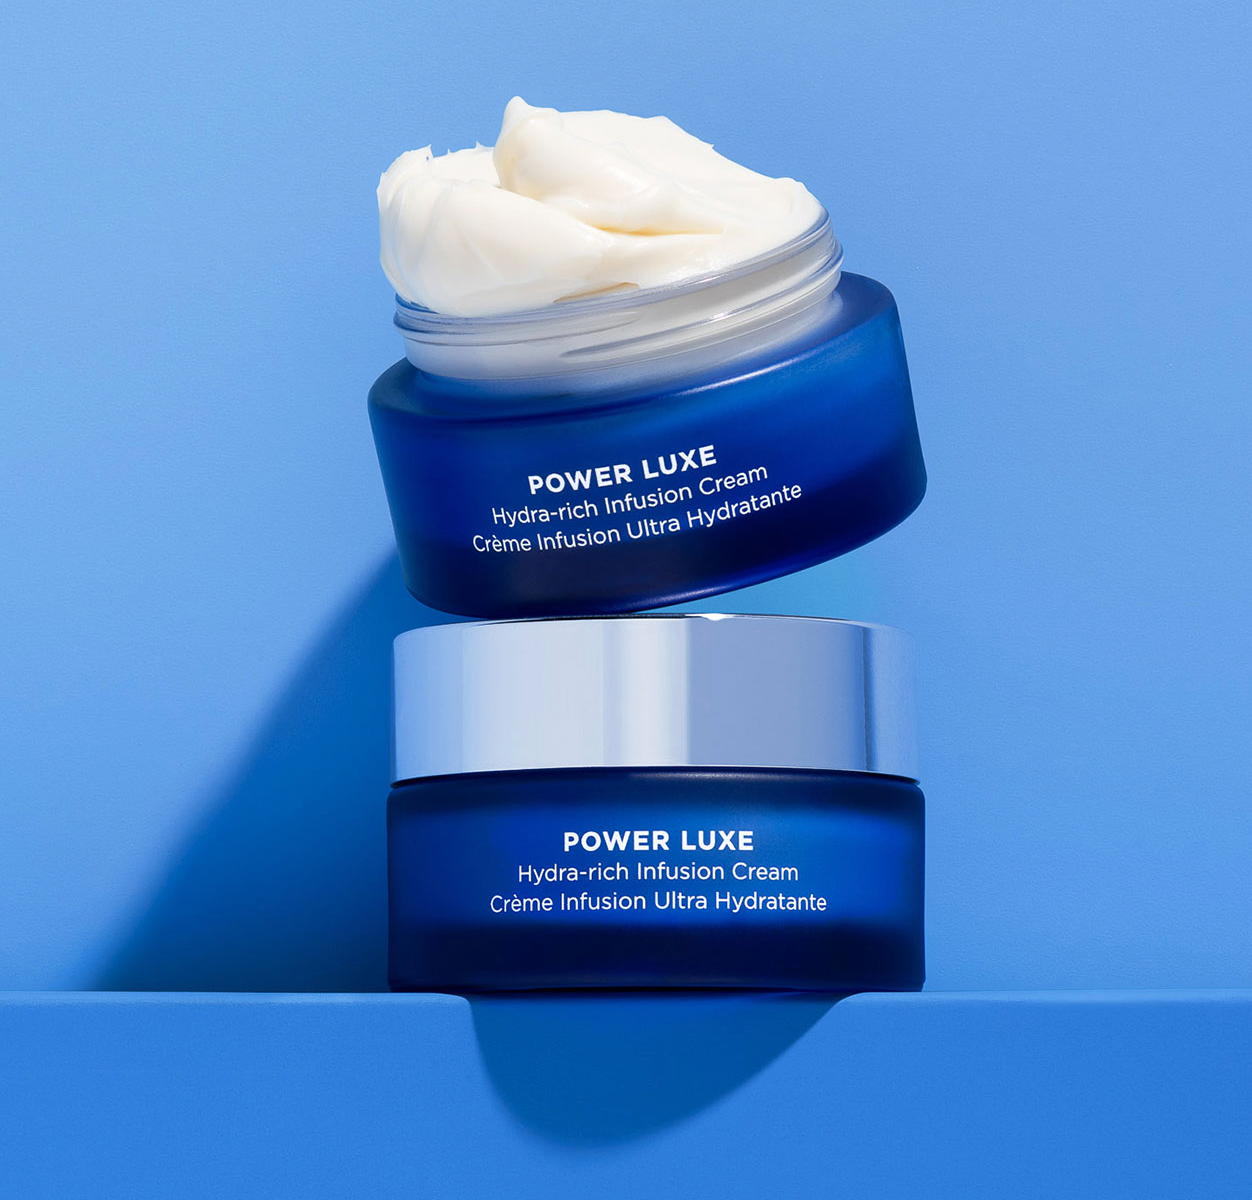 HydroPeptide Power Luxe Hydra-rich Infusion Cream